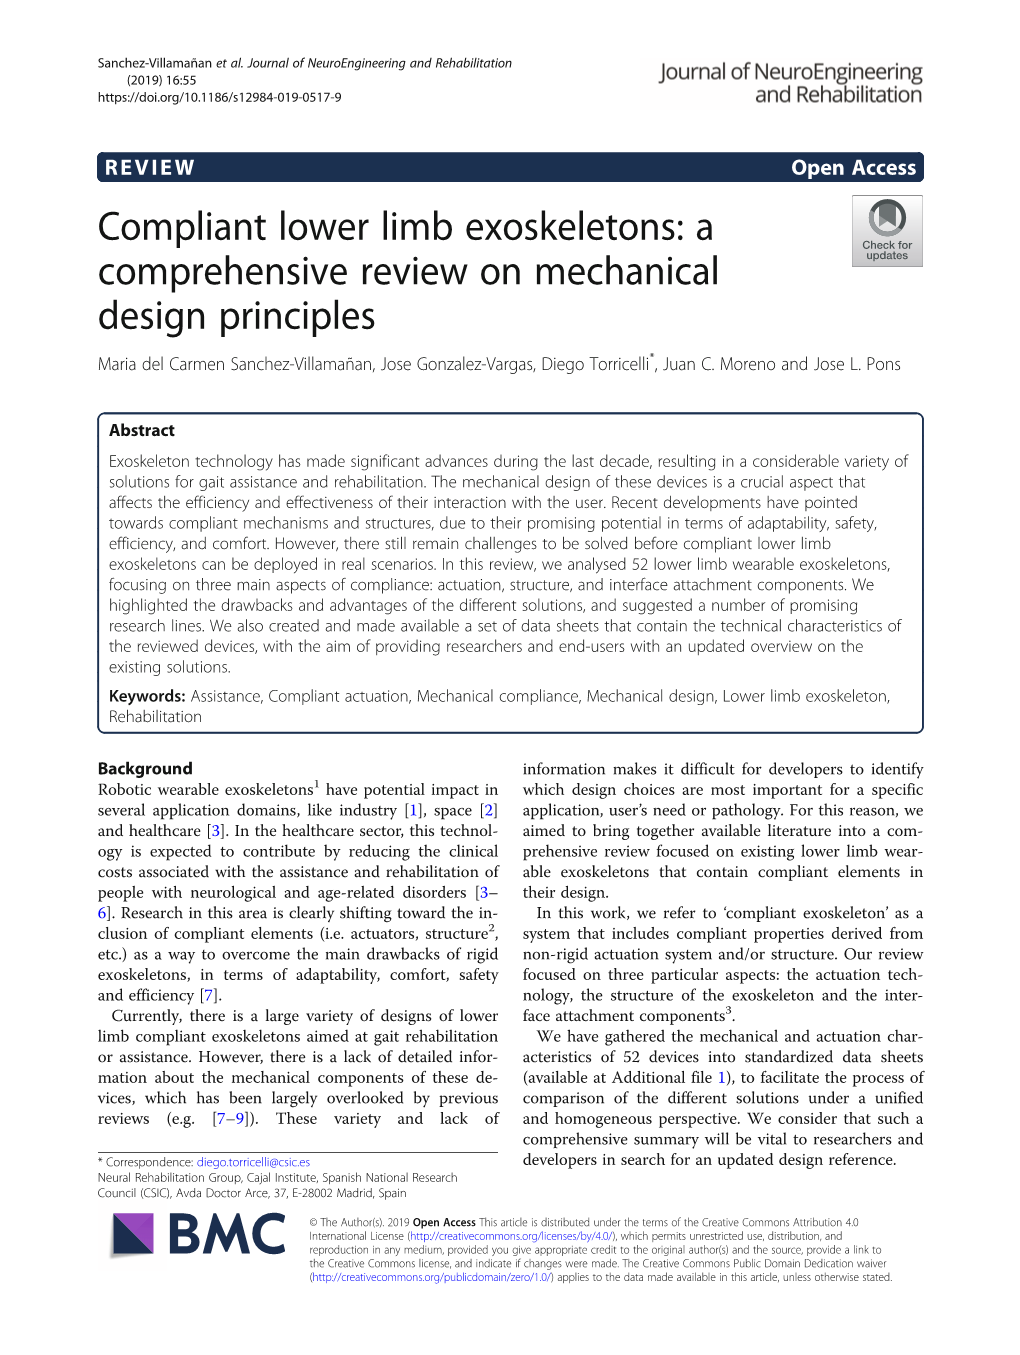 Compliant Lower Limb Exoskeletons: a Comprehensive Review On